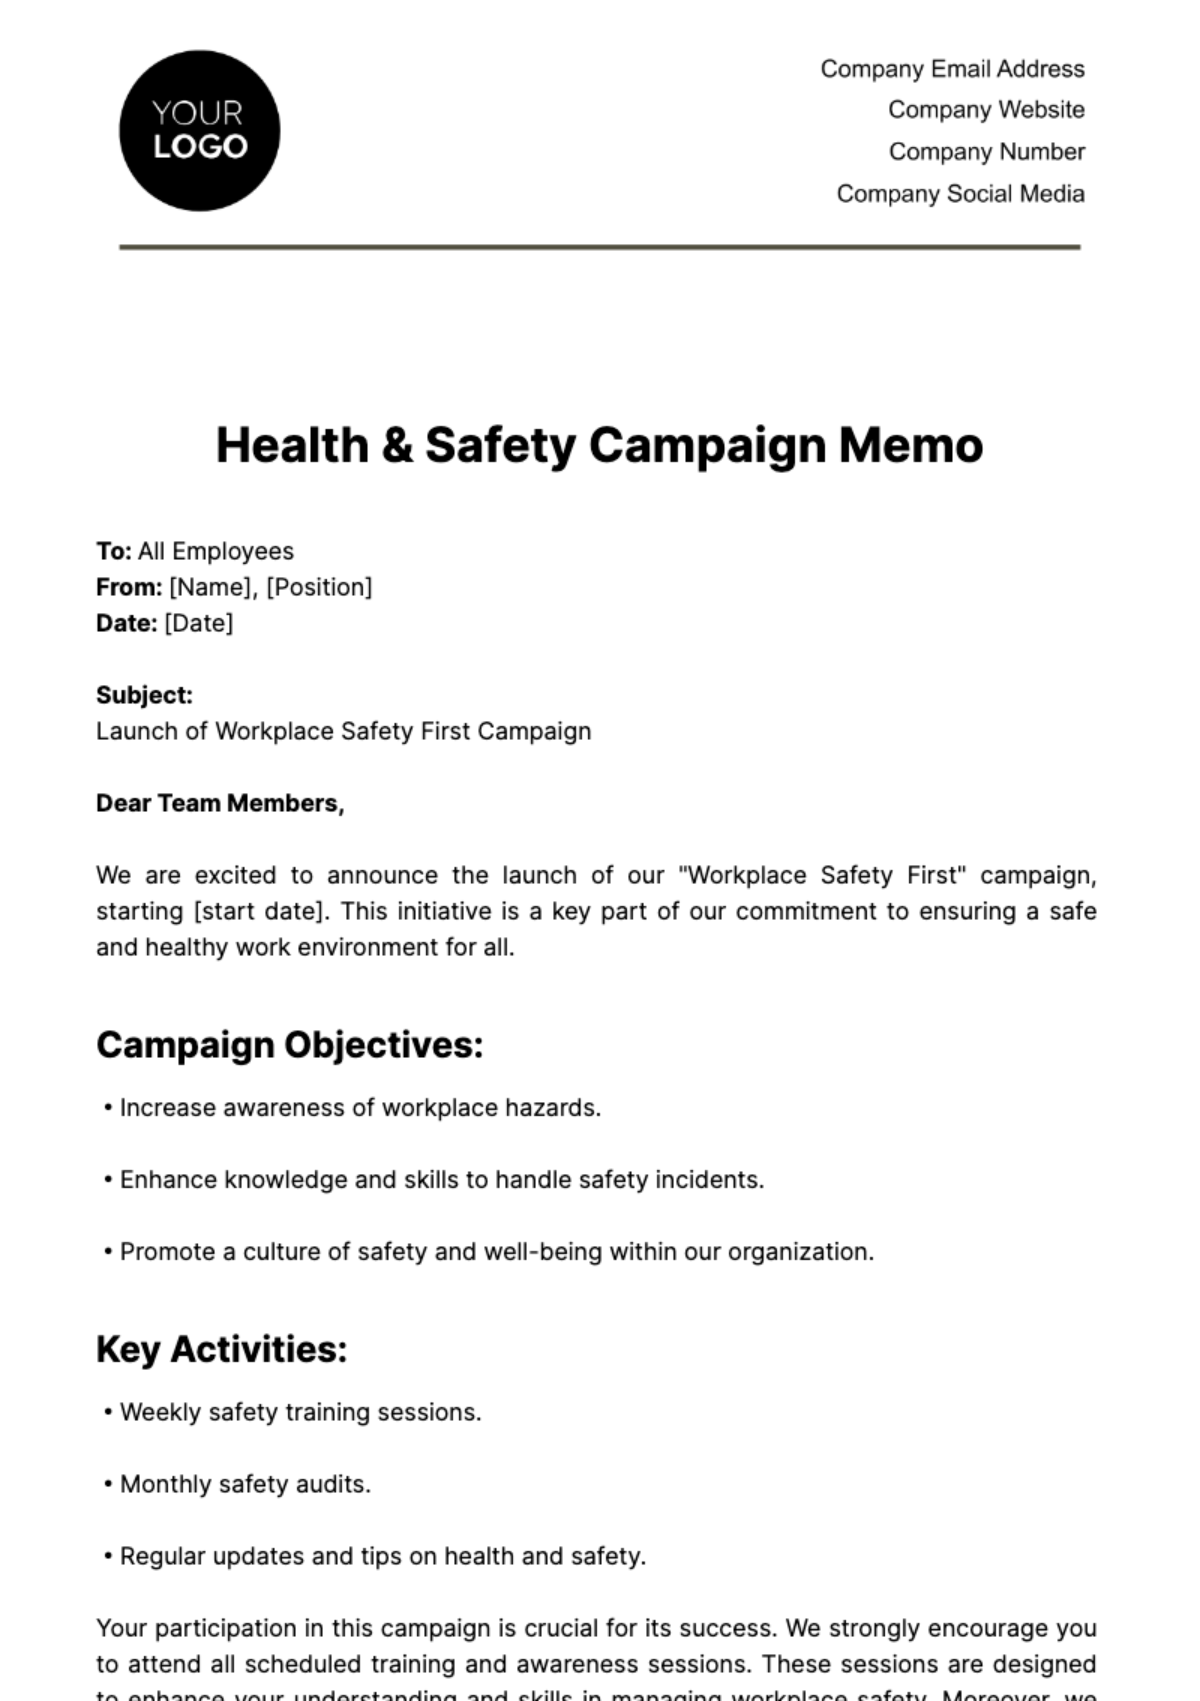 Health & Safety Campaign Memo Template